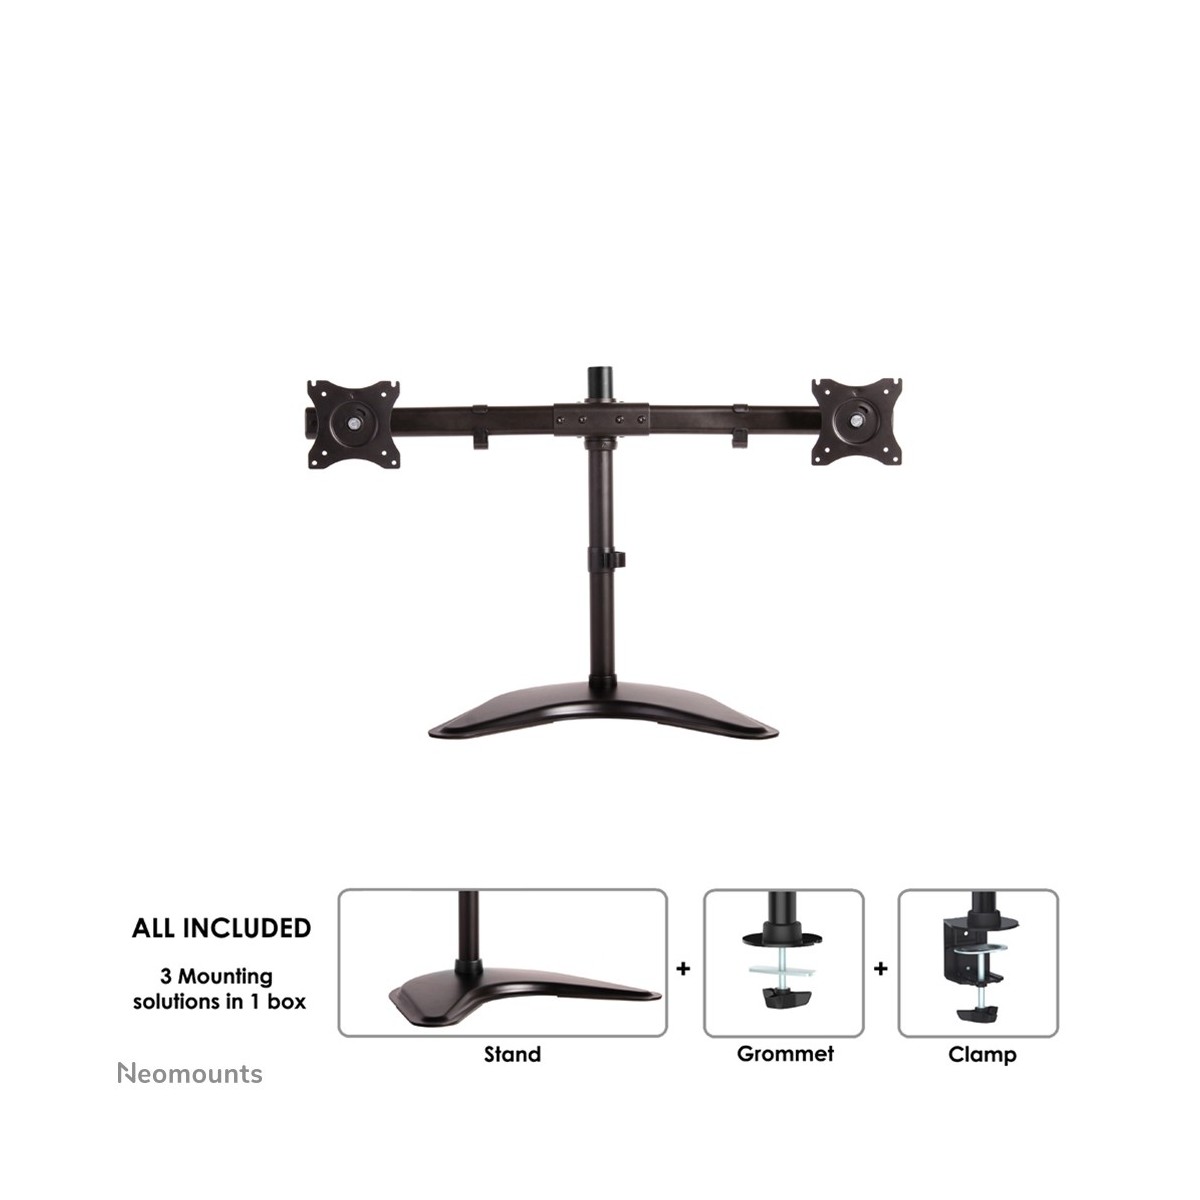 10-27 Inch - Flat screen desk mount - Clamp and Stand - 2 Screens - Black